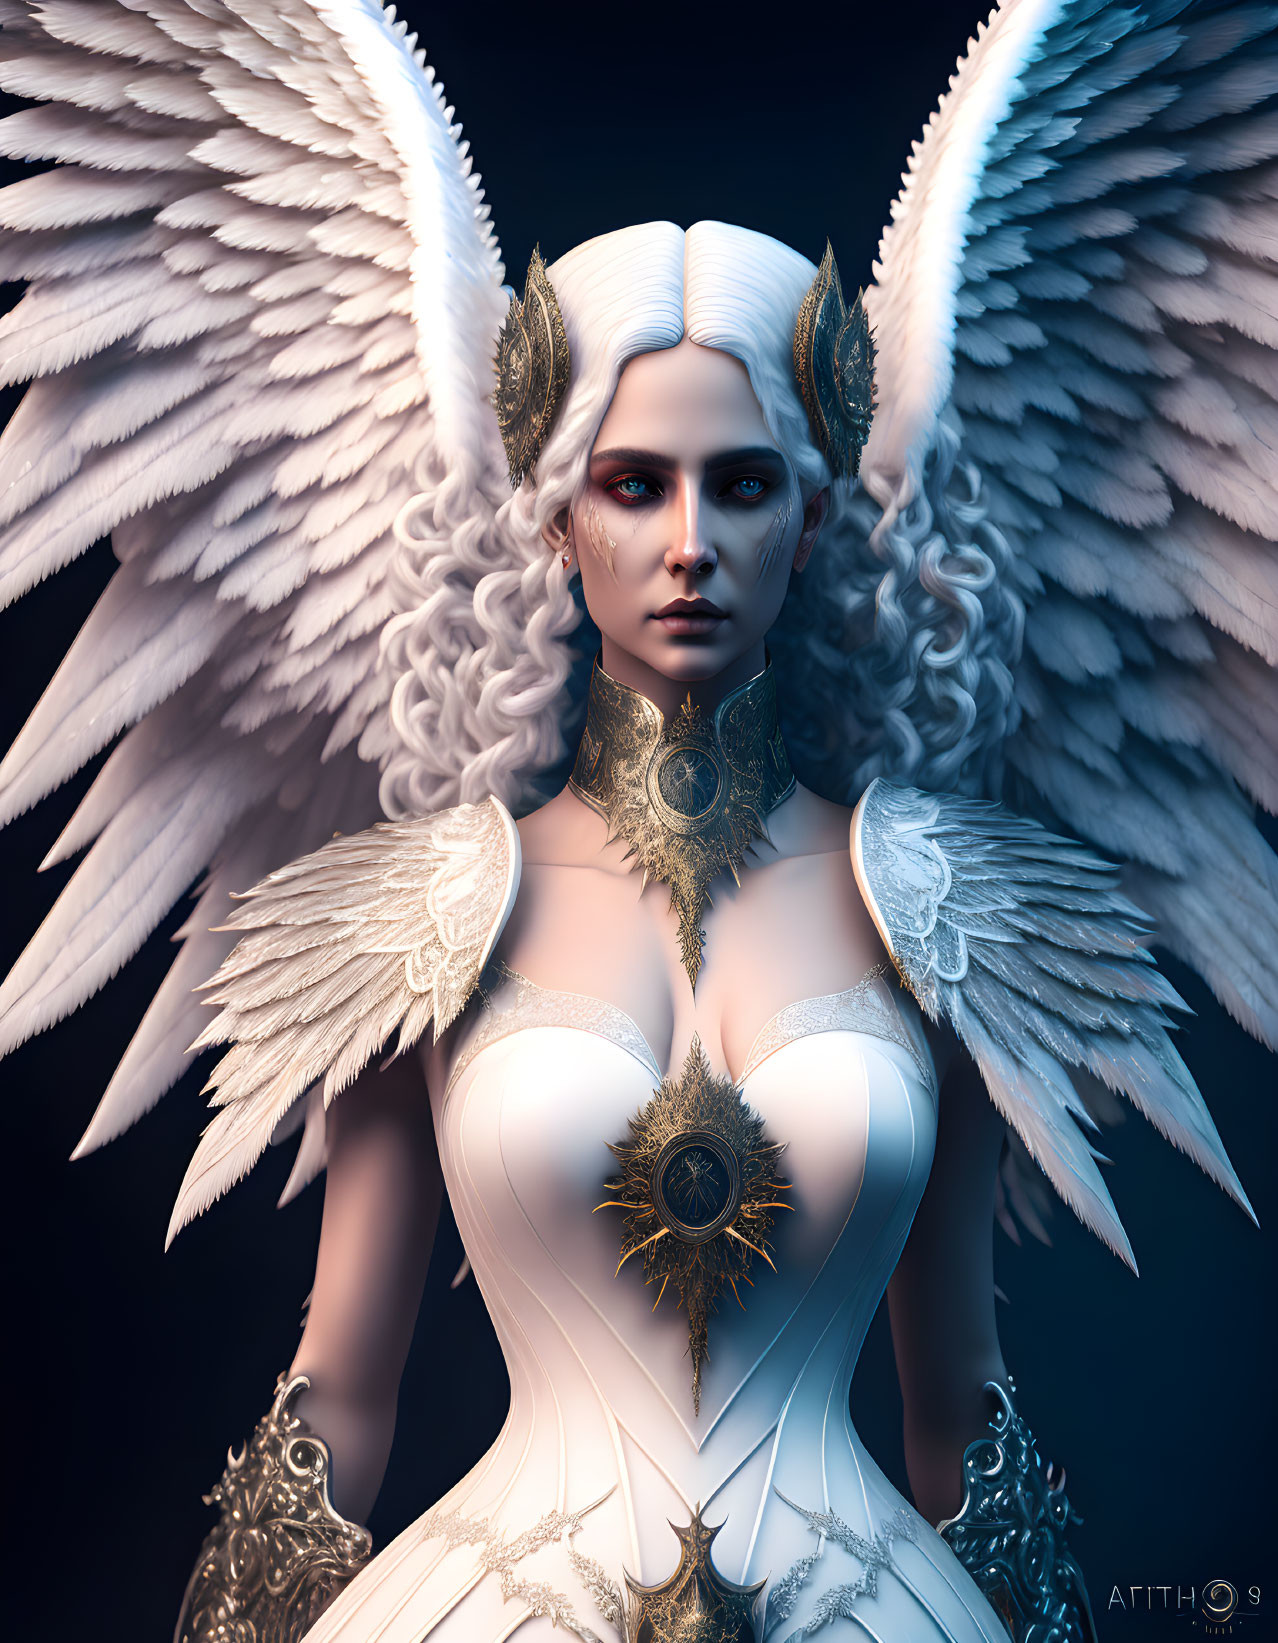 Fantastical female figure with white wings and ornate armor on dark background